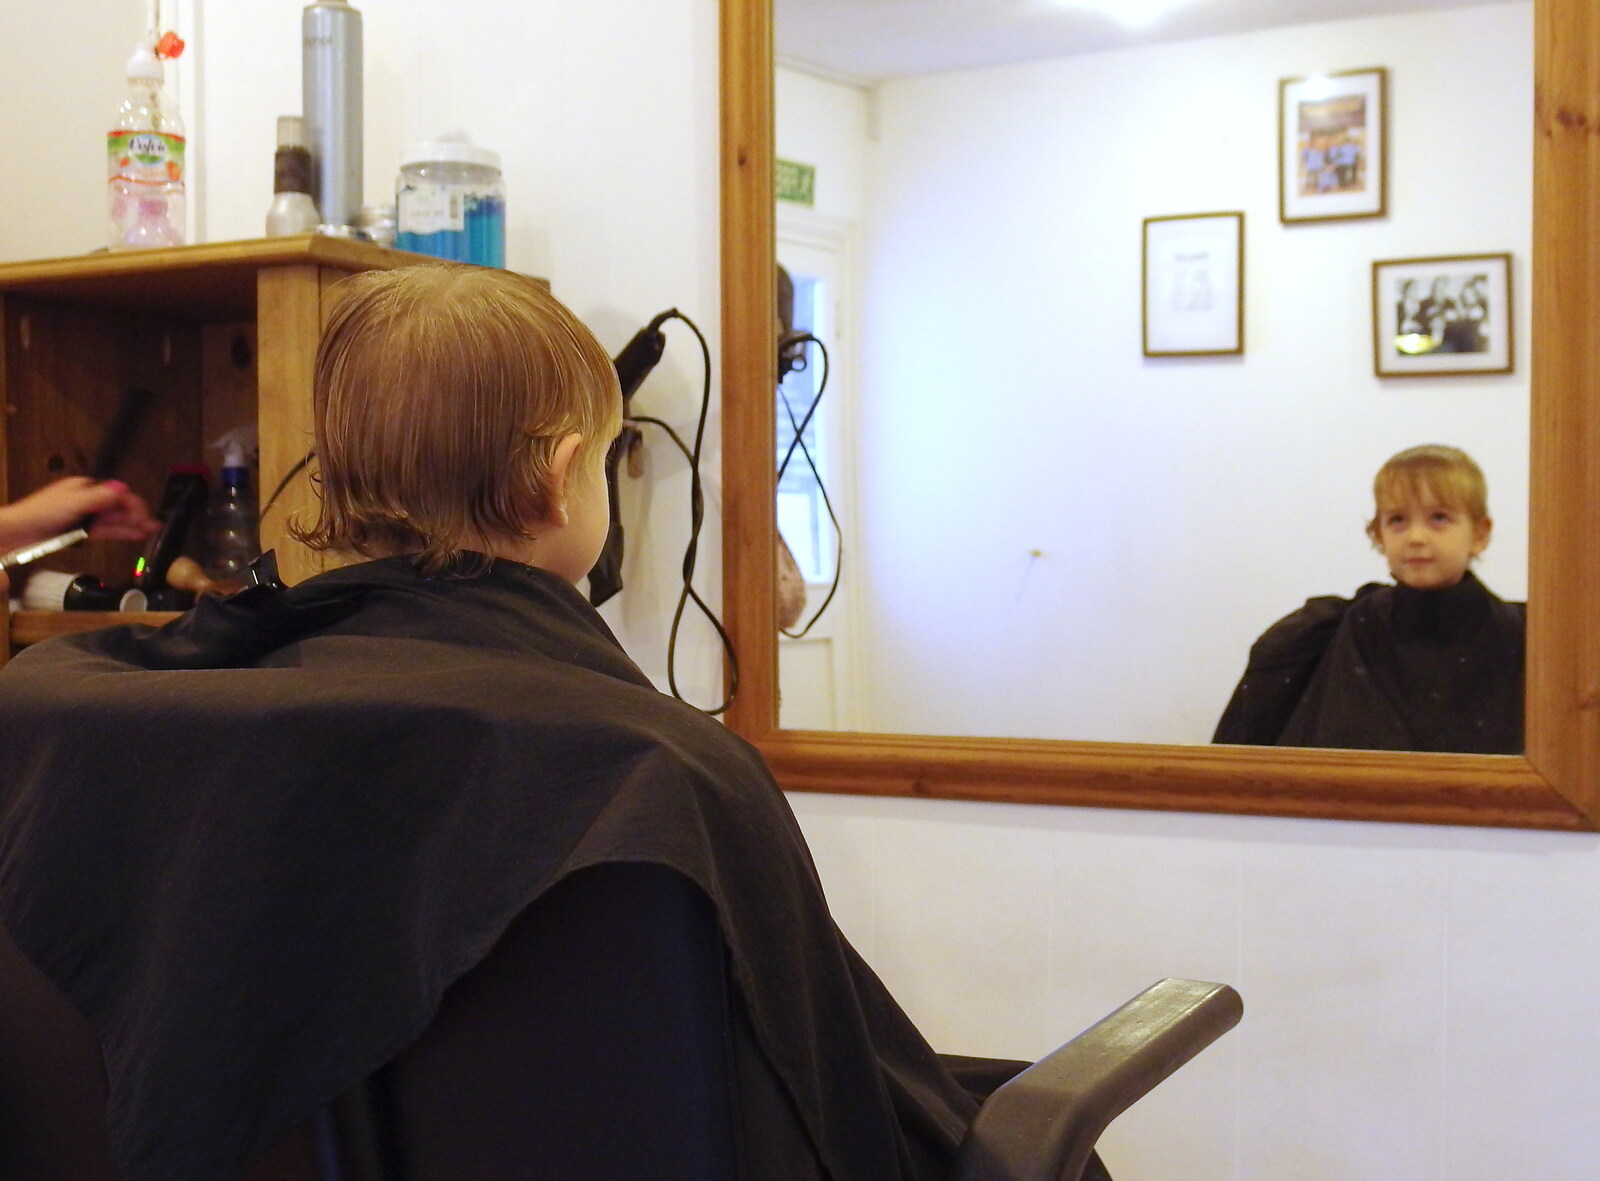 A November Miscellany and Building Progress, Thornham and Brome, Suffolk - 17th November 2013: Fred gets a haircut